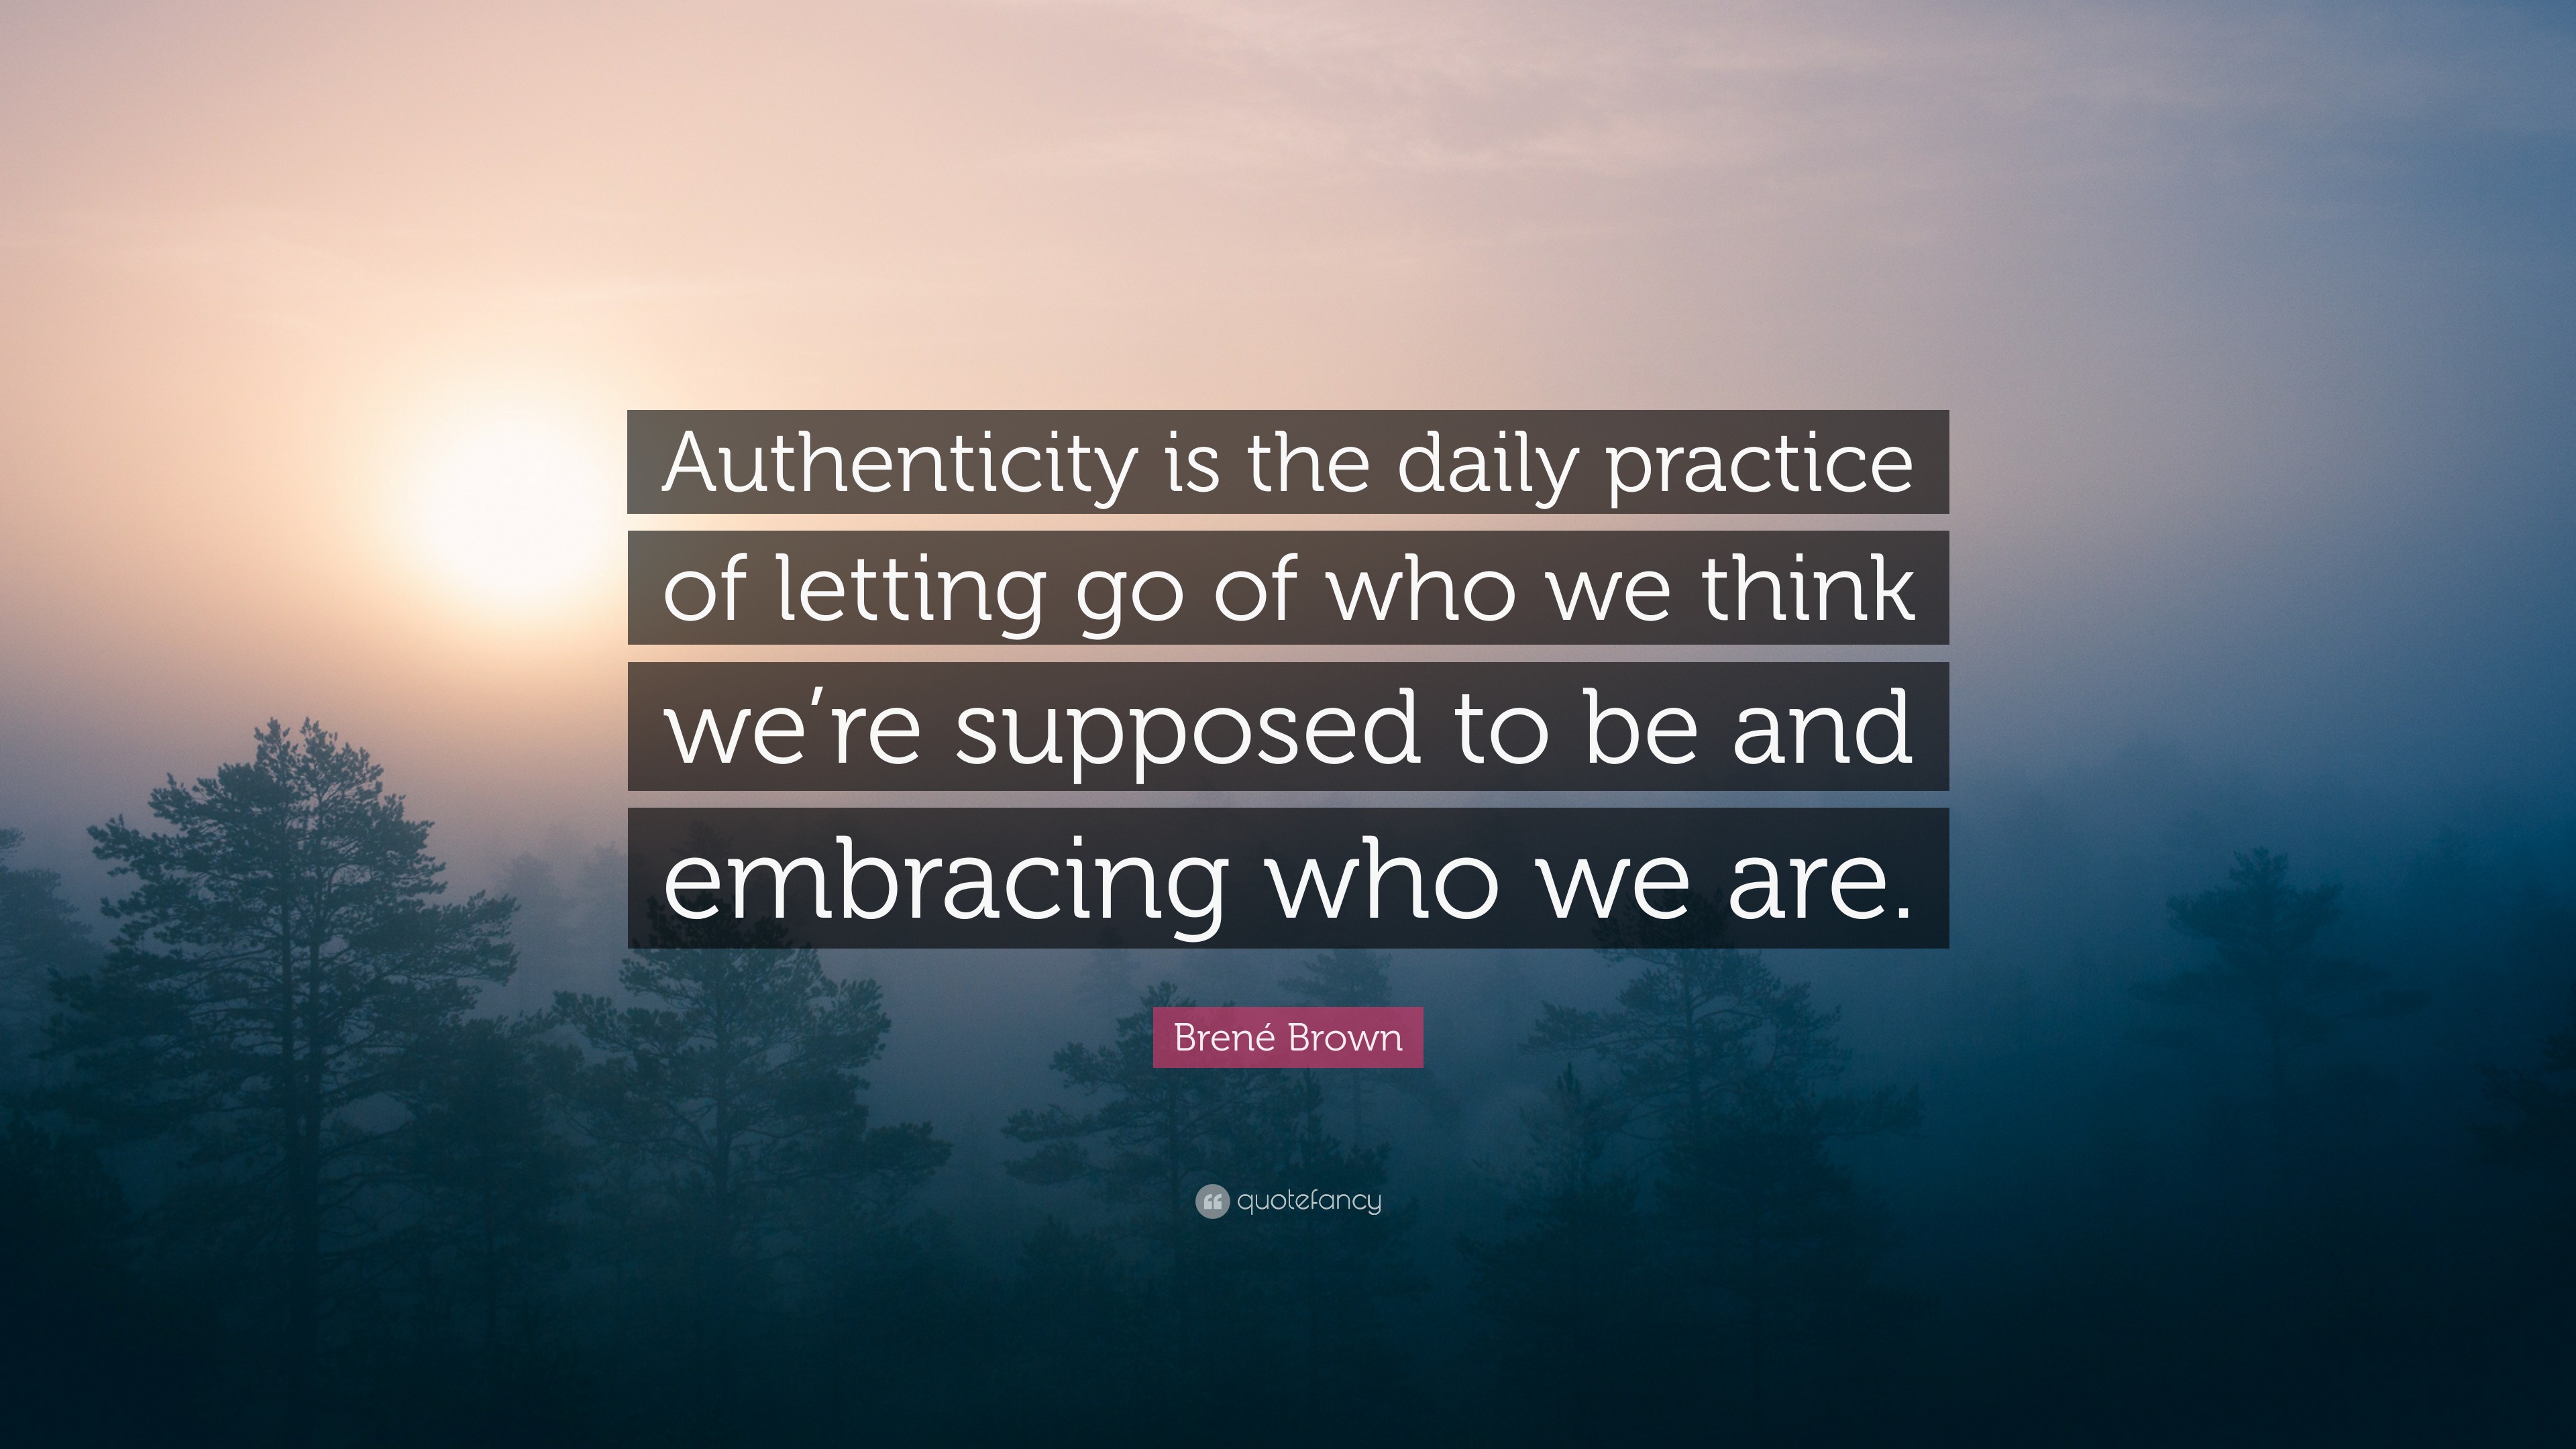 Brené Brown Quote: “Authenticity is the daily practice of letting go of